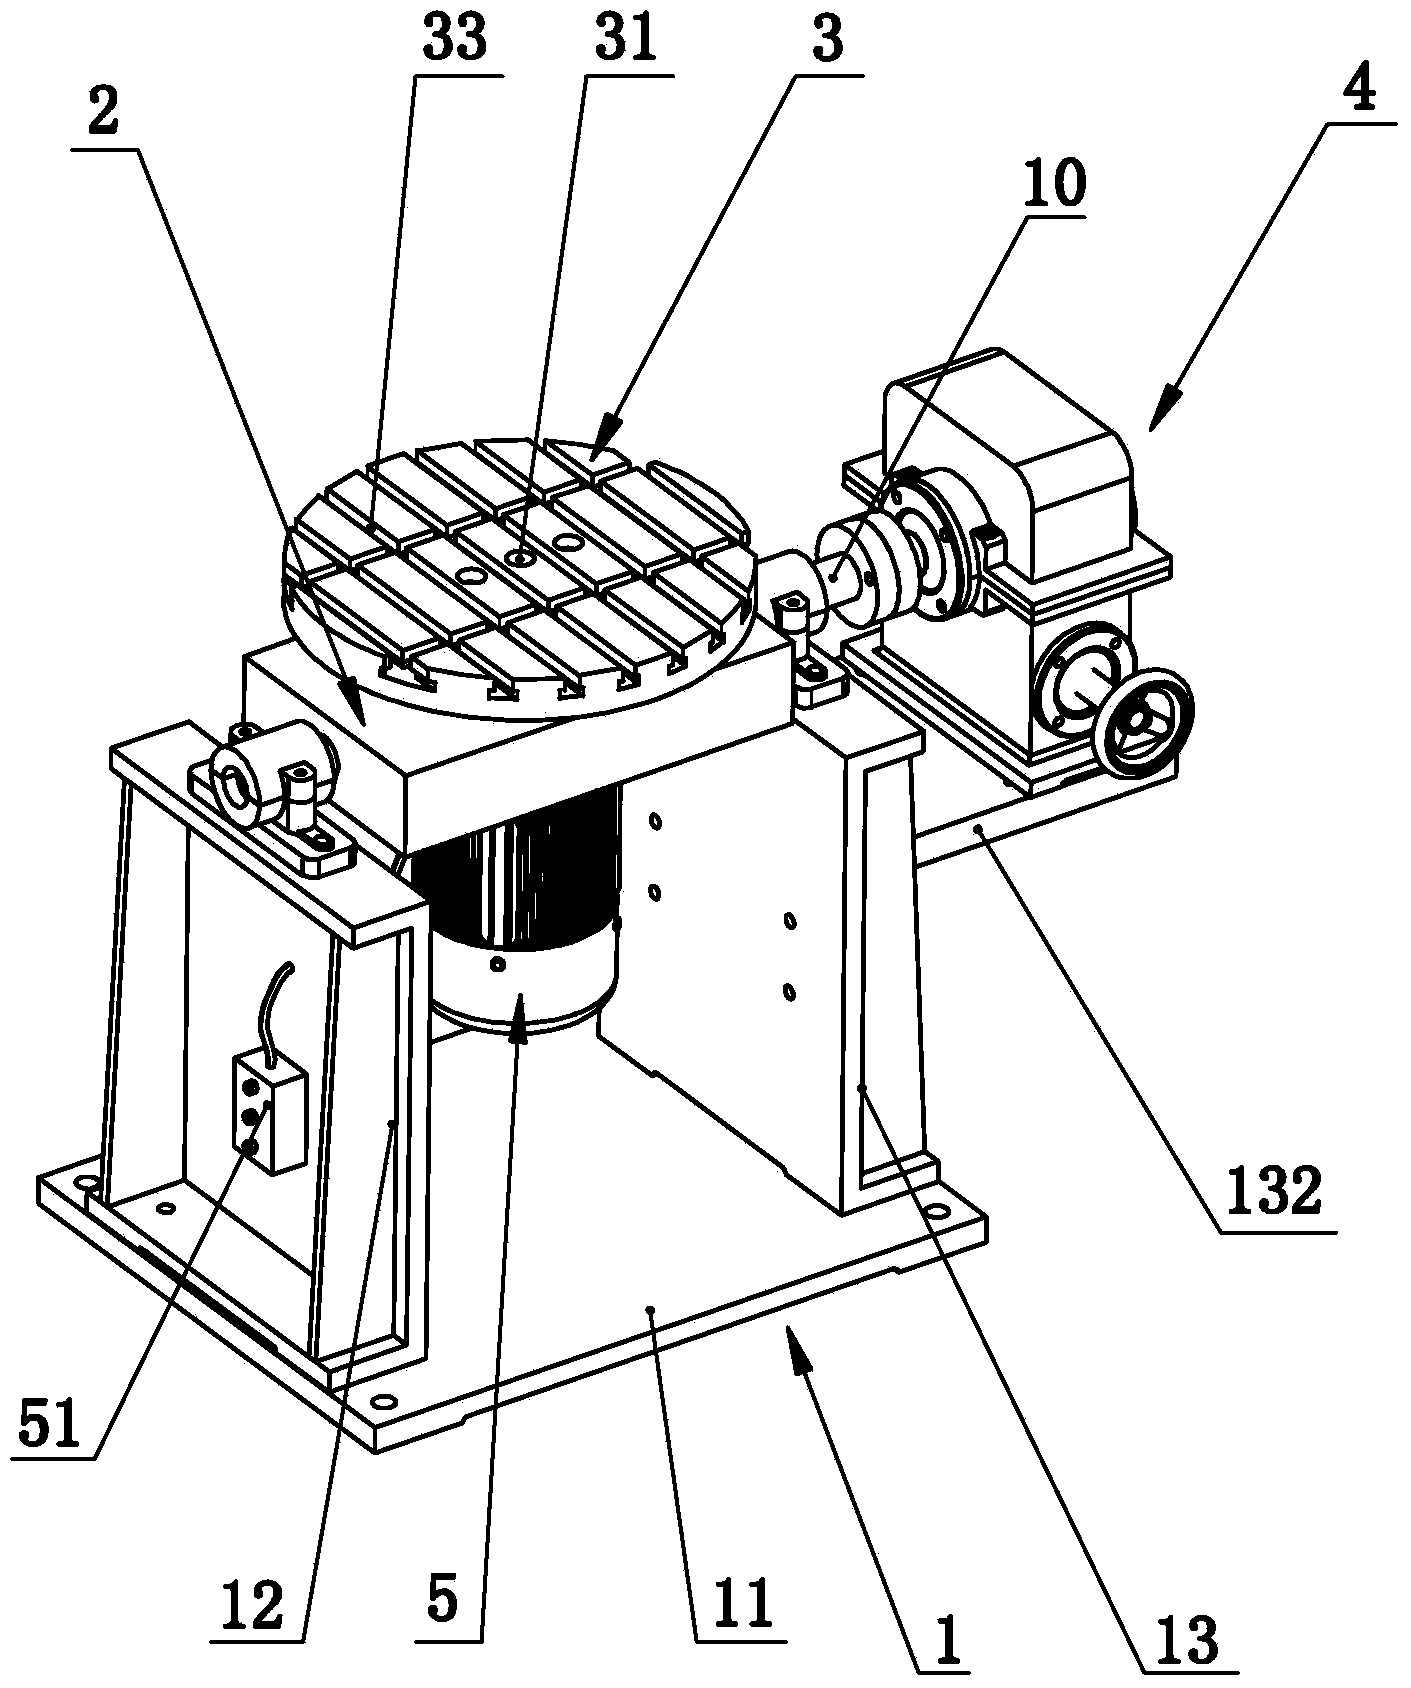 Automatic feeder used for arc welding